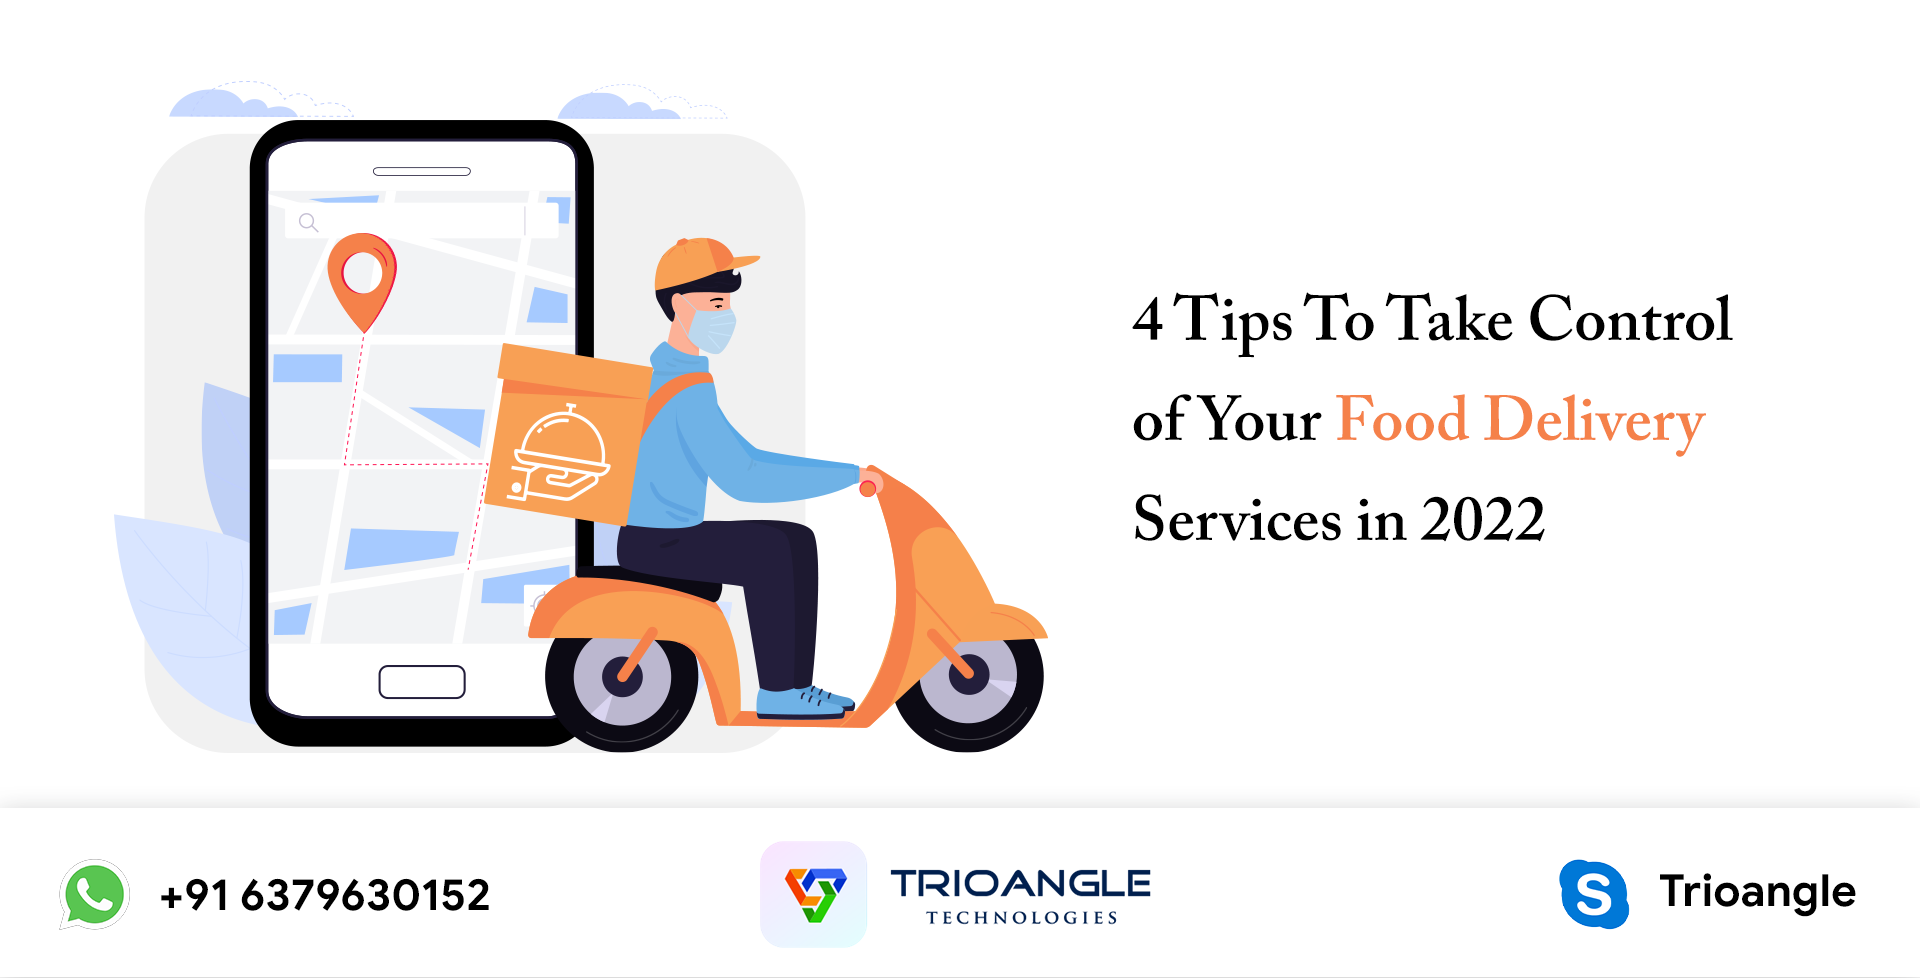 4 Tips To Take Control of Your Food Delivery Services in 2022